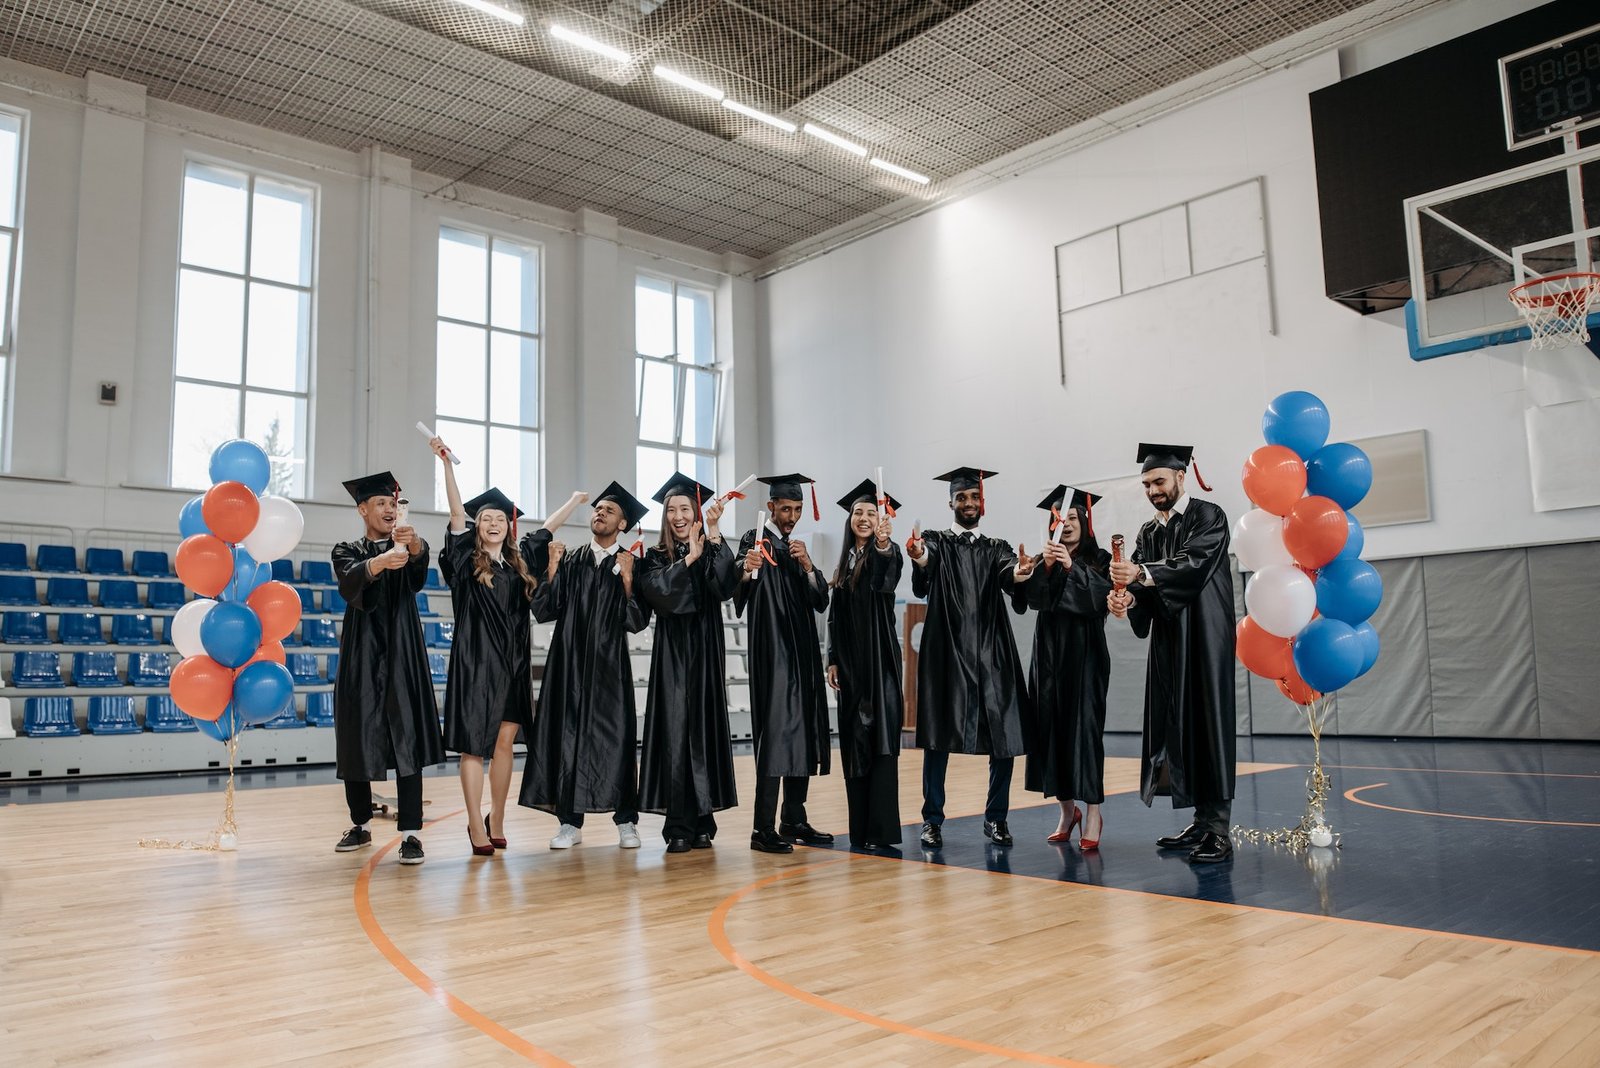 alt="a group of men and women in graduation gown holding up their degrees, part of education background"